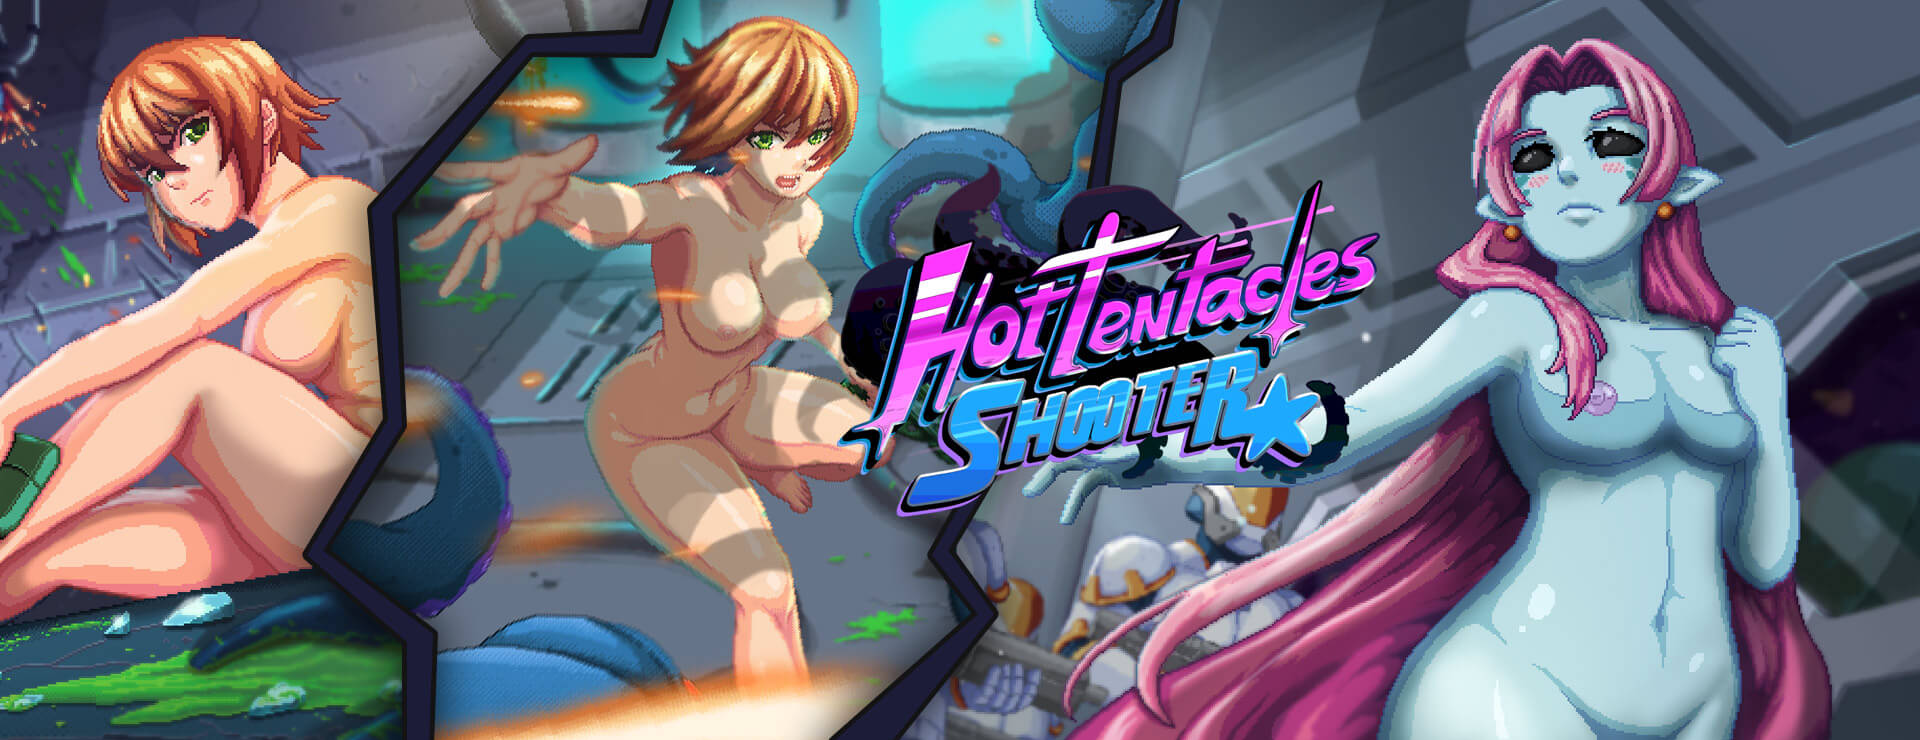 Hot Tentacles Shooter - Action Adventure Game